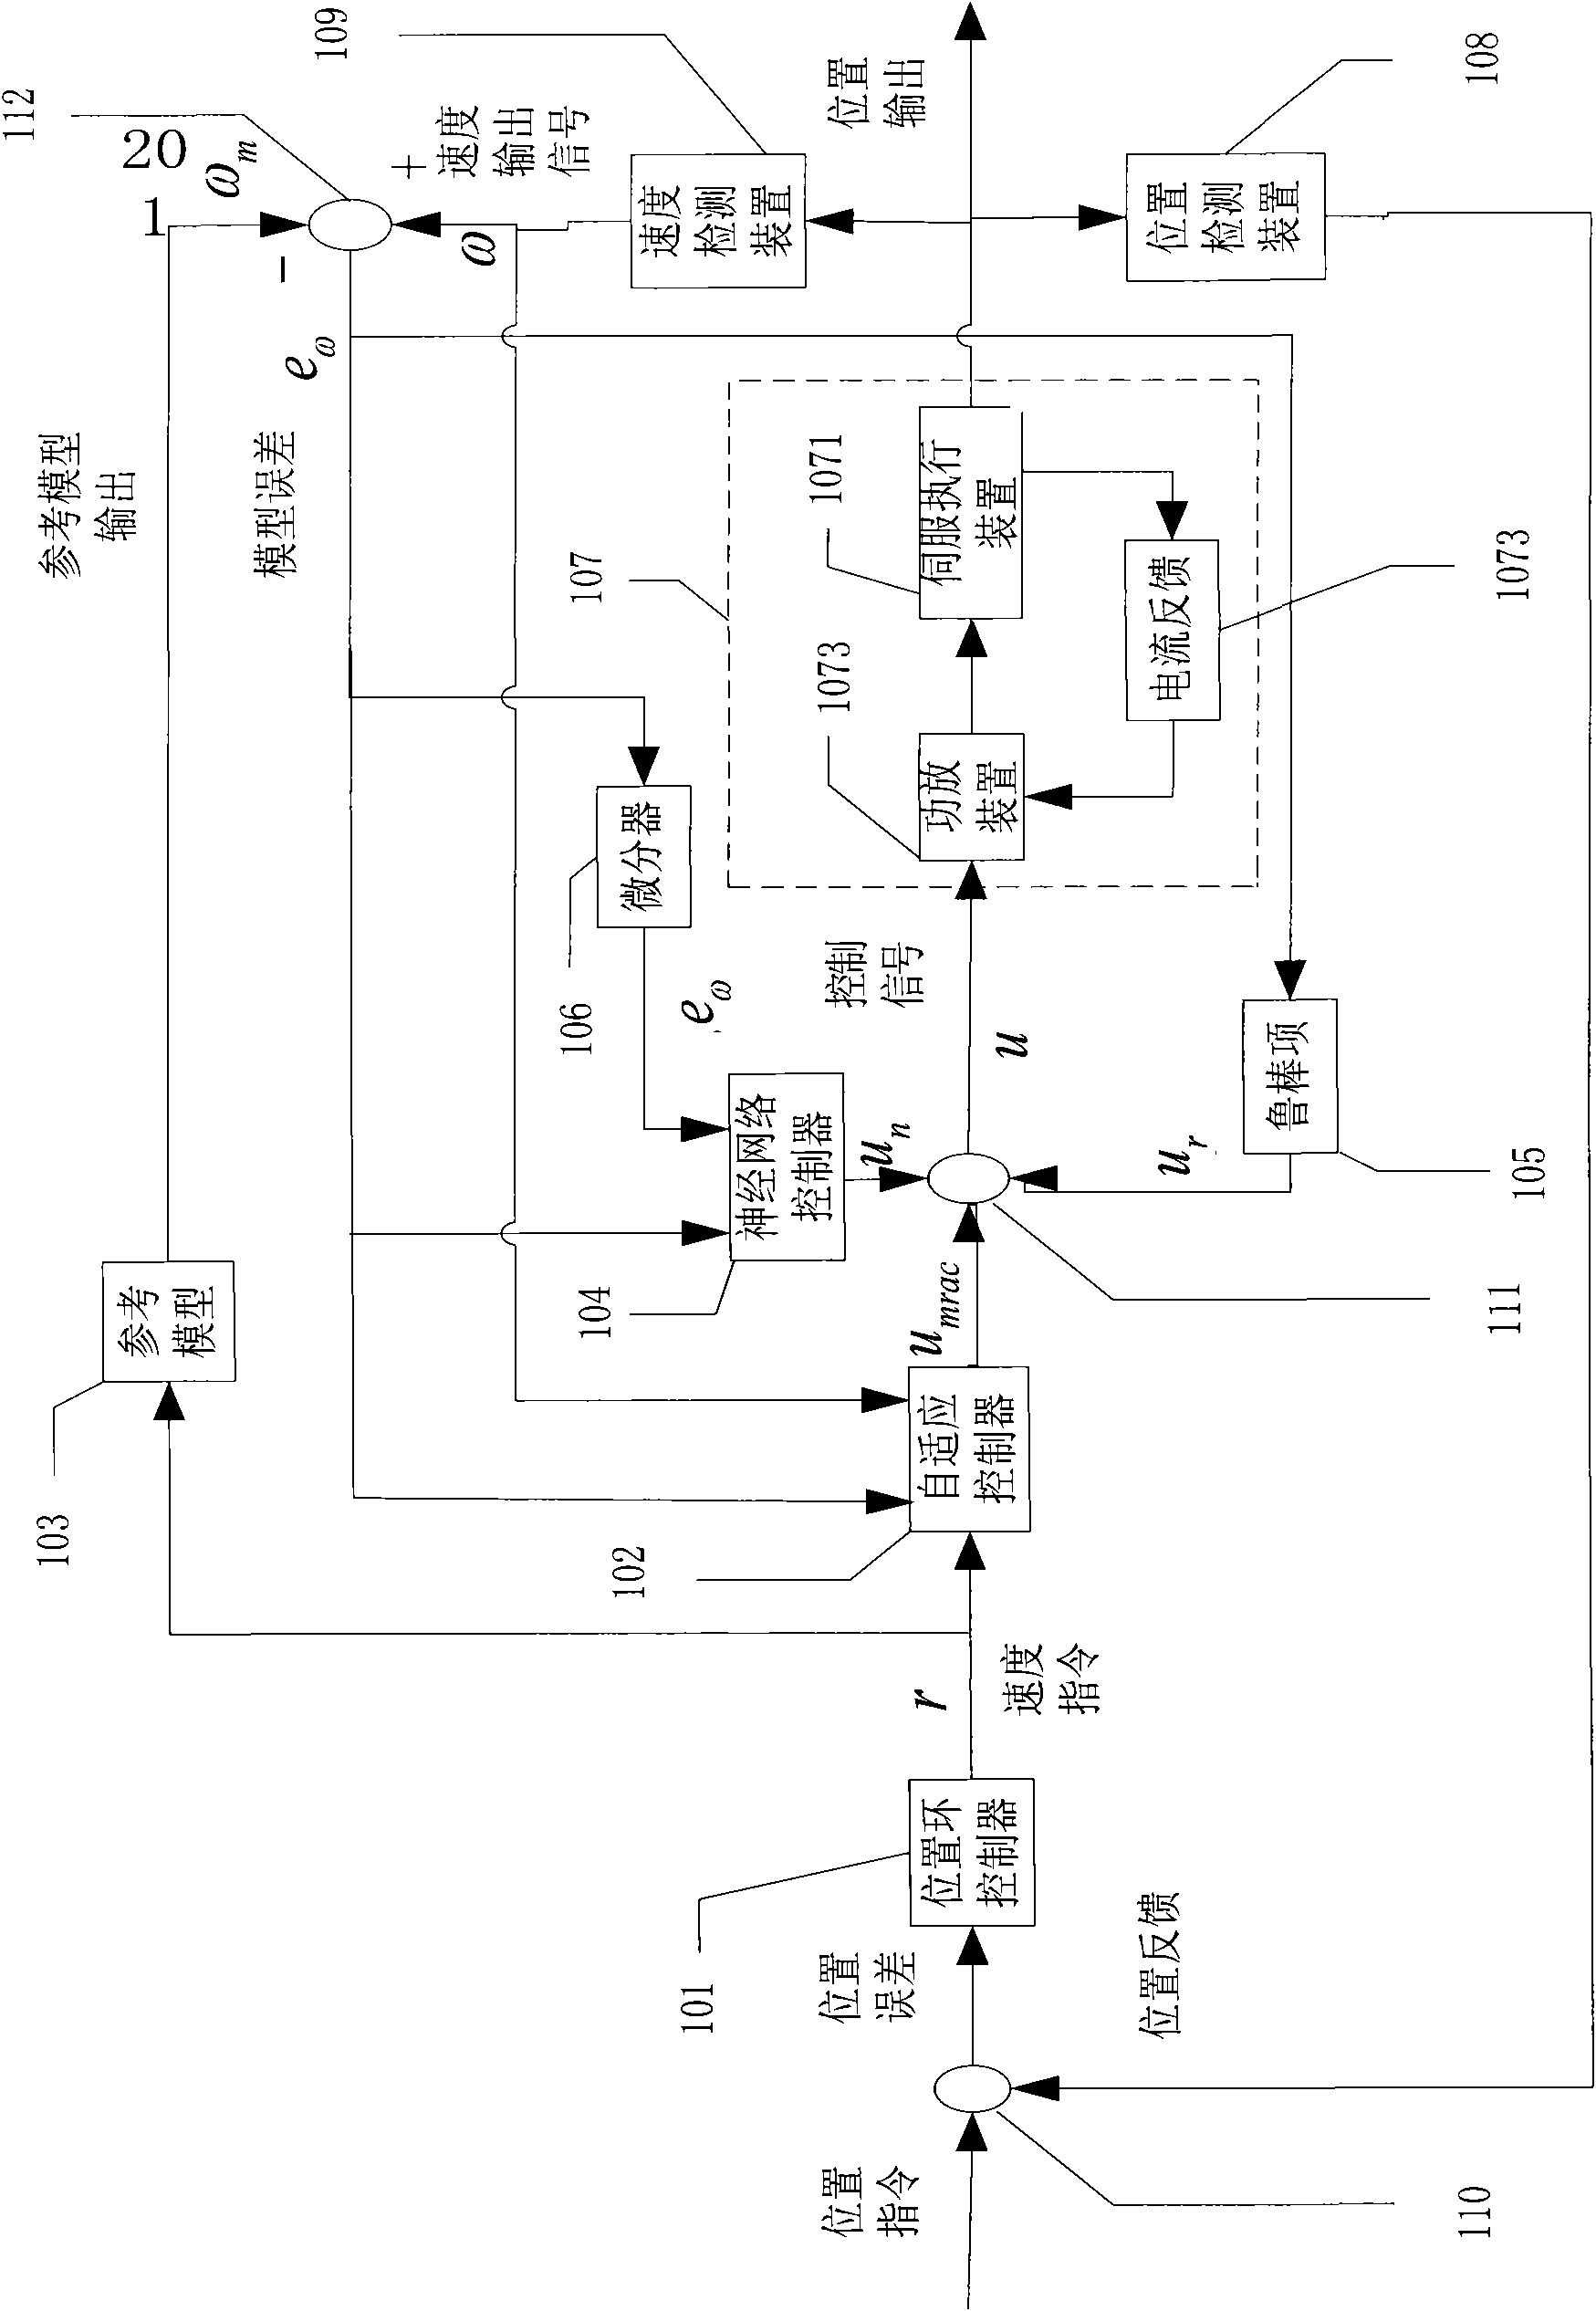 Neural network-based servo control system and method